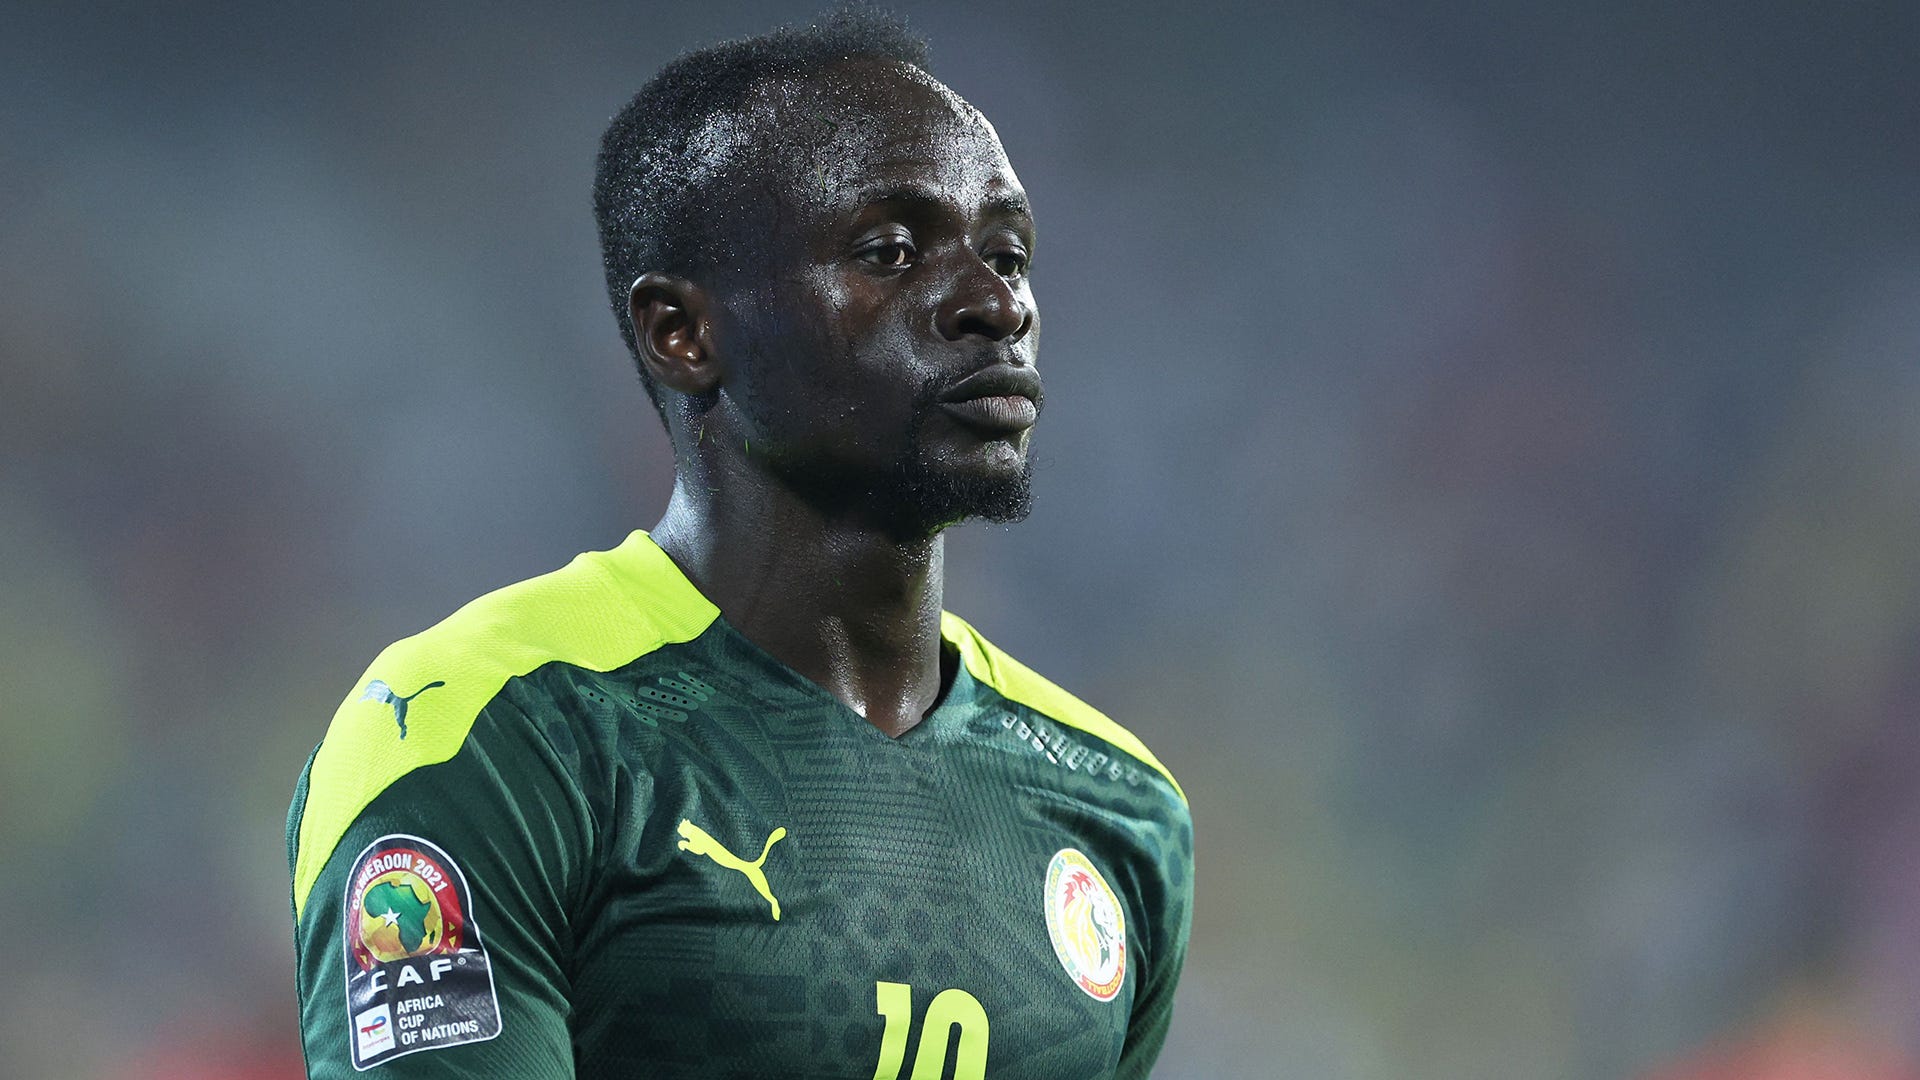 Sadio Mane to miss 'first games' of World Cup with injury, Senegal soccer federation board member claims | Goal.com